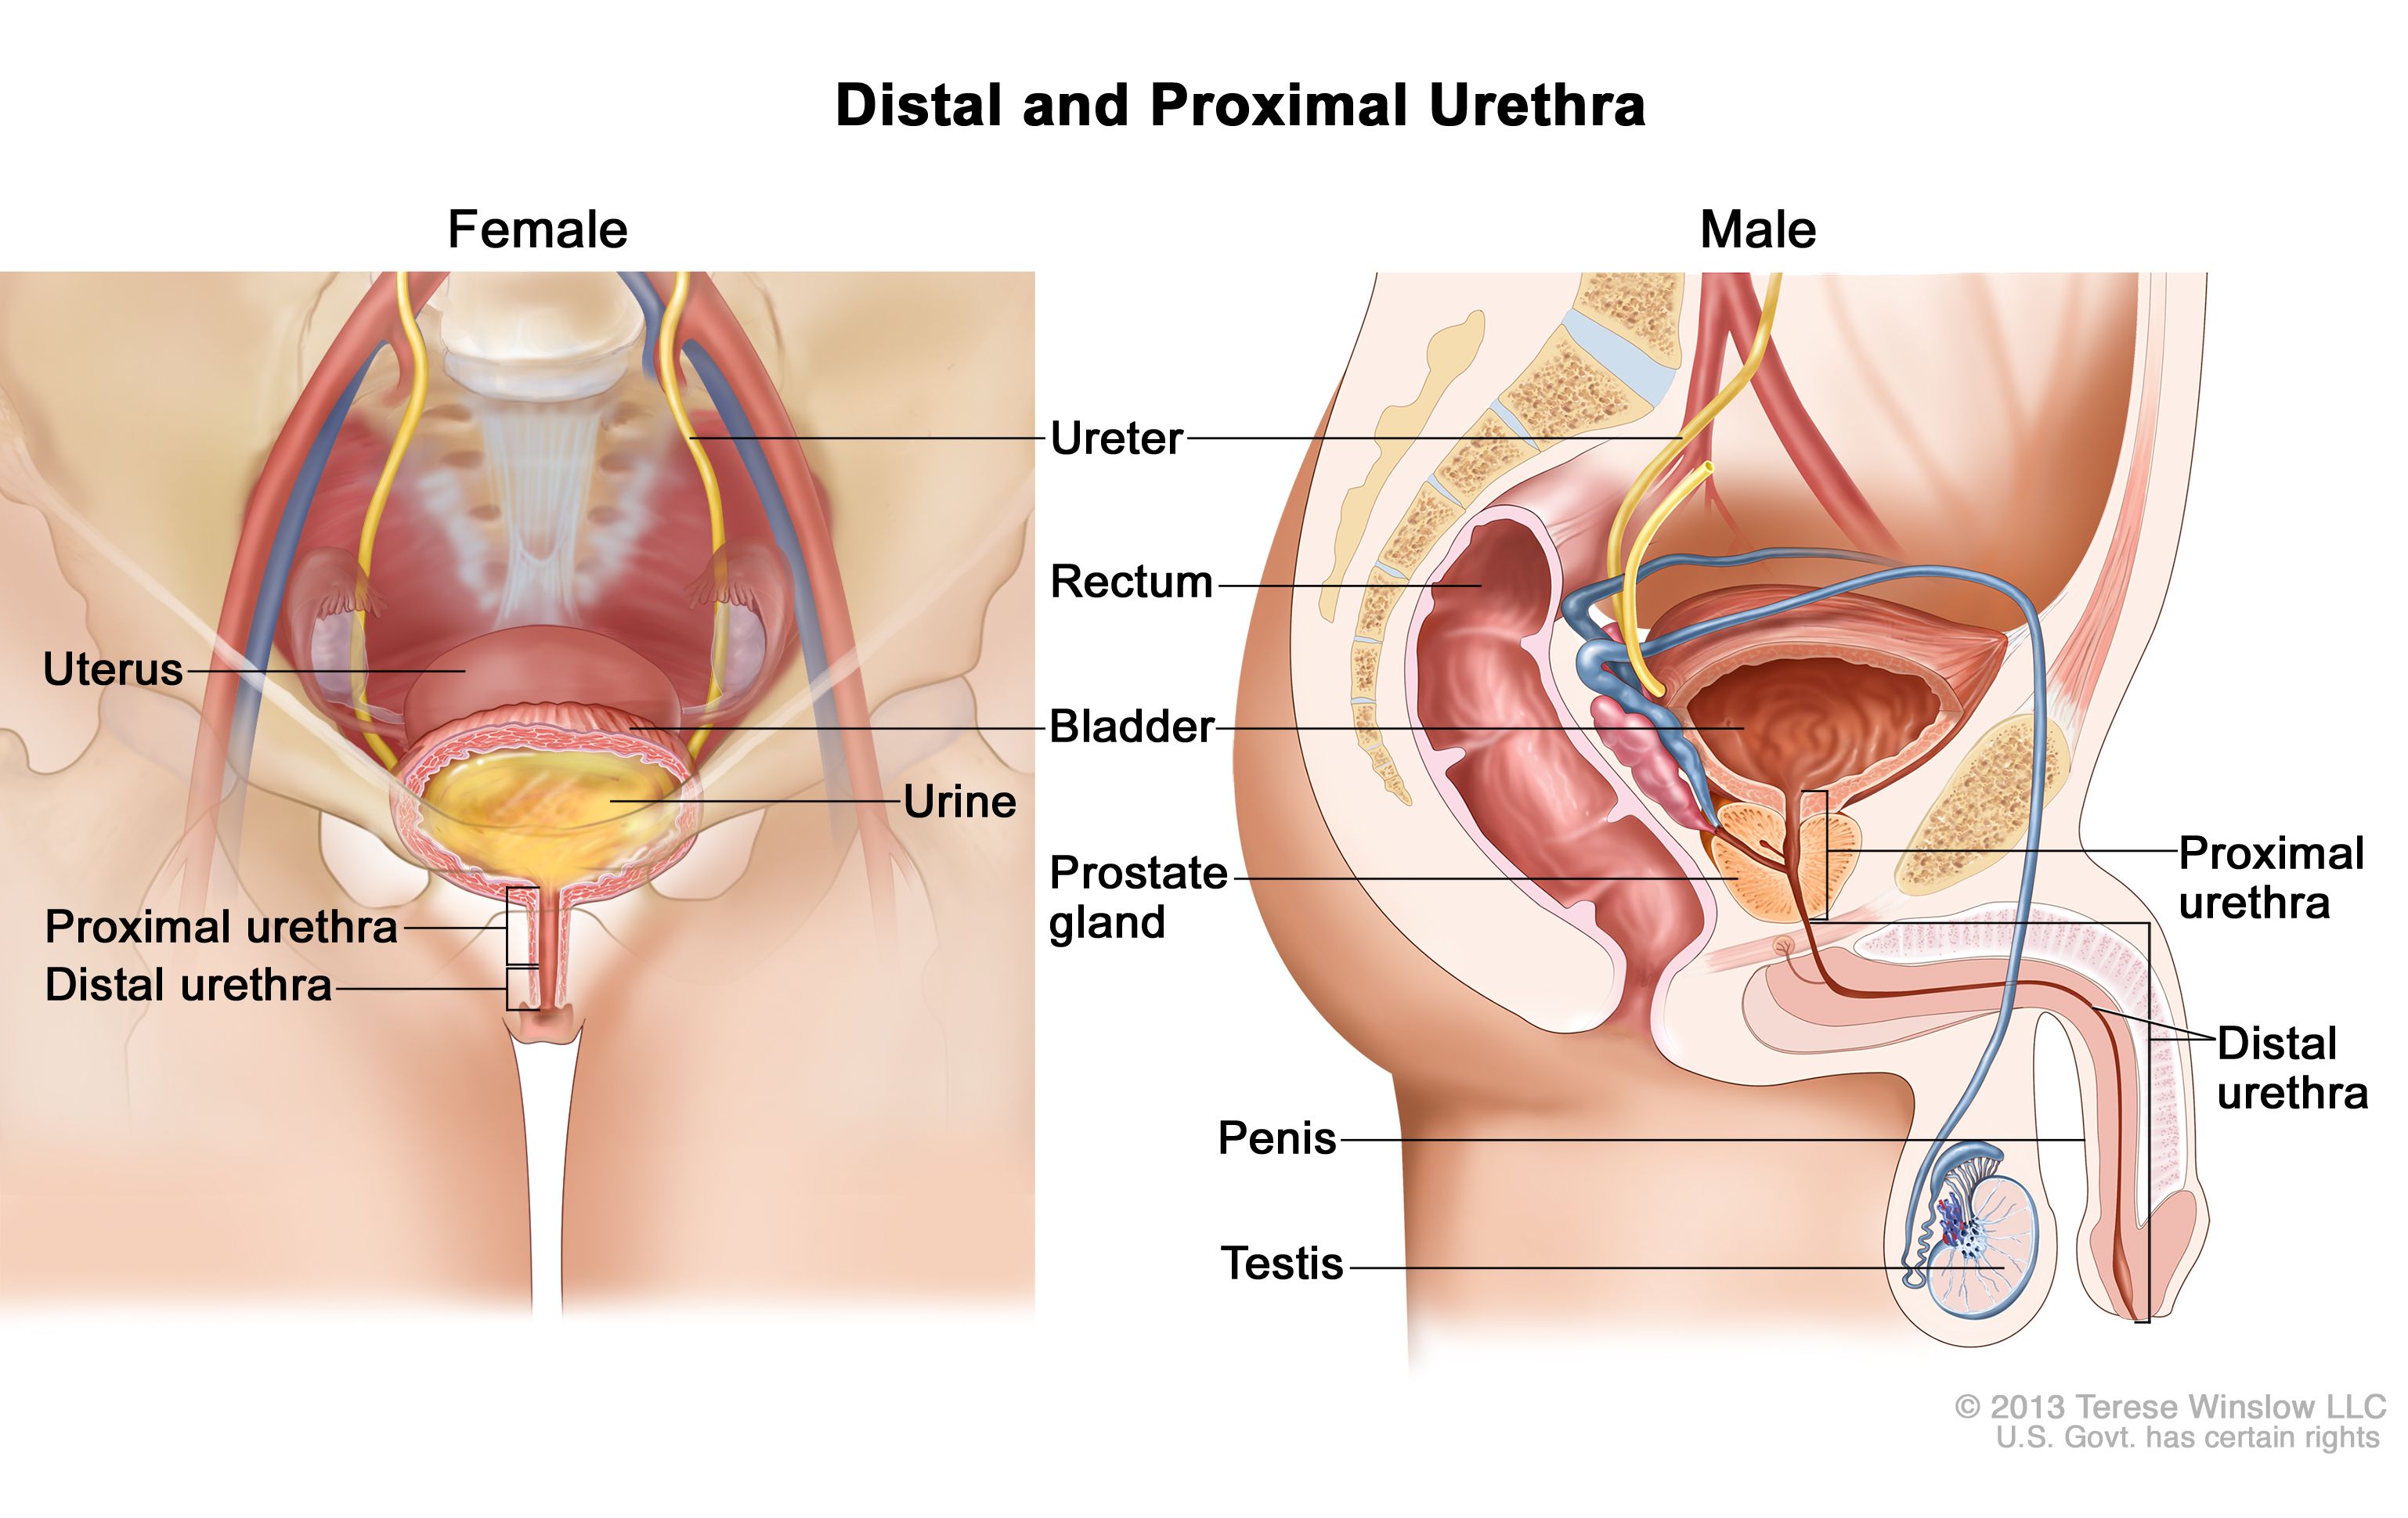 Can hpv cause urethral cancer. Urinary bladder inverted papilloma Hpv warts in urethra